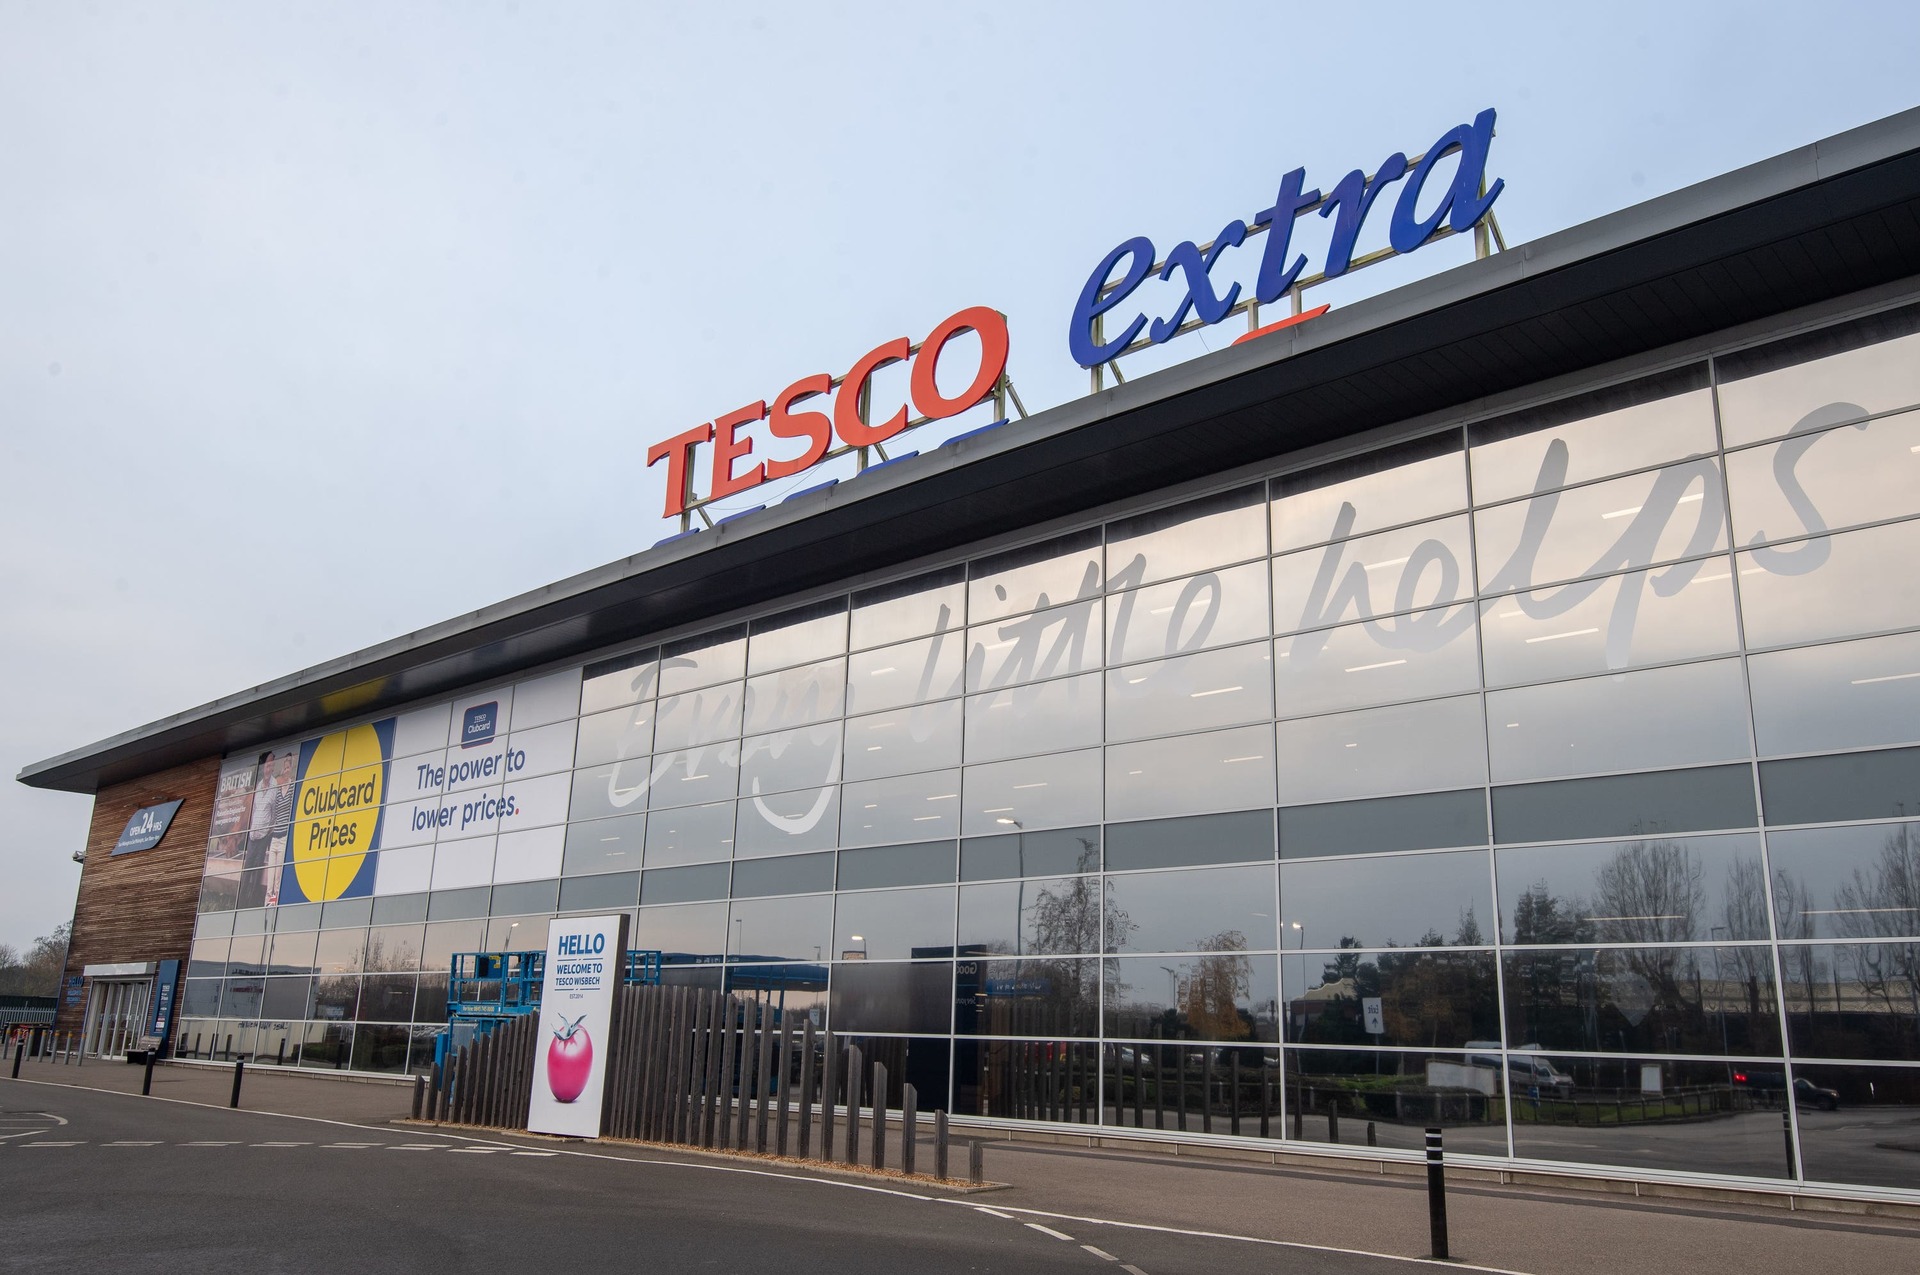 Tesco said last month it was cutting the prices of more than 500 household essentials.